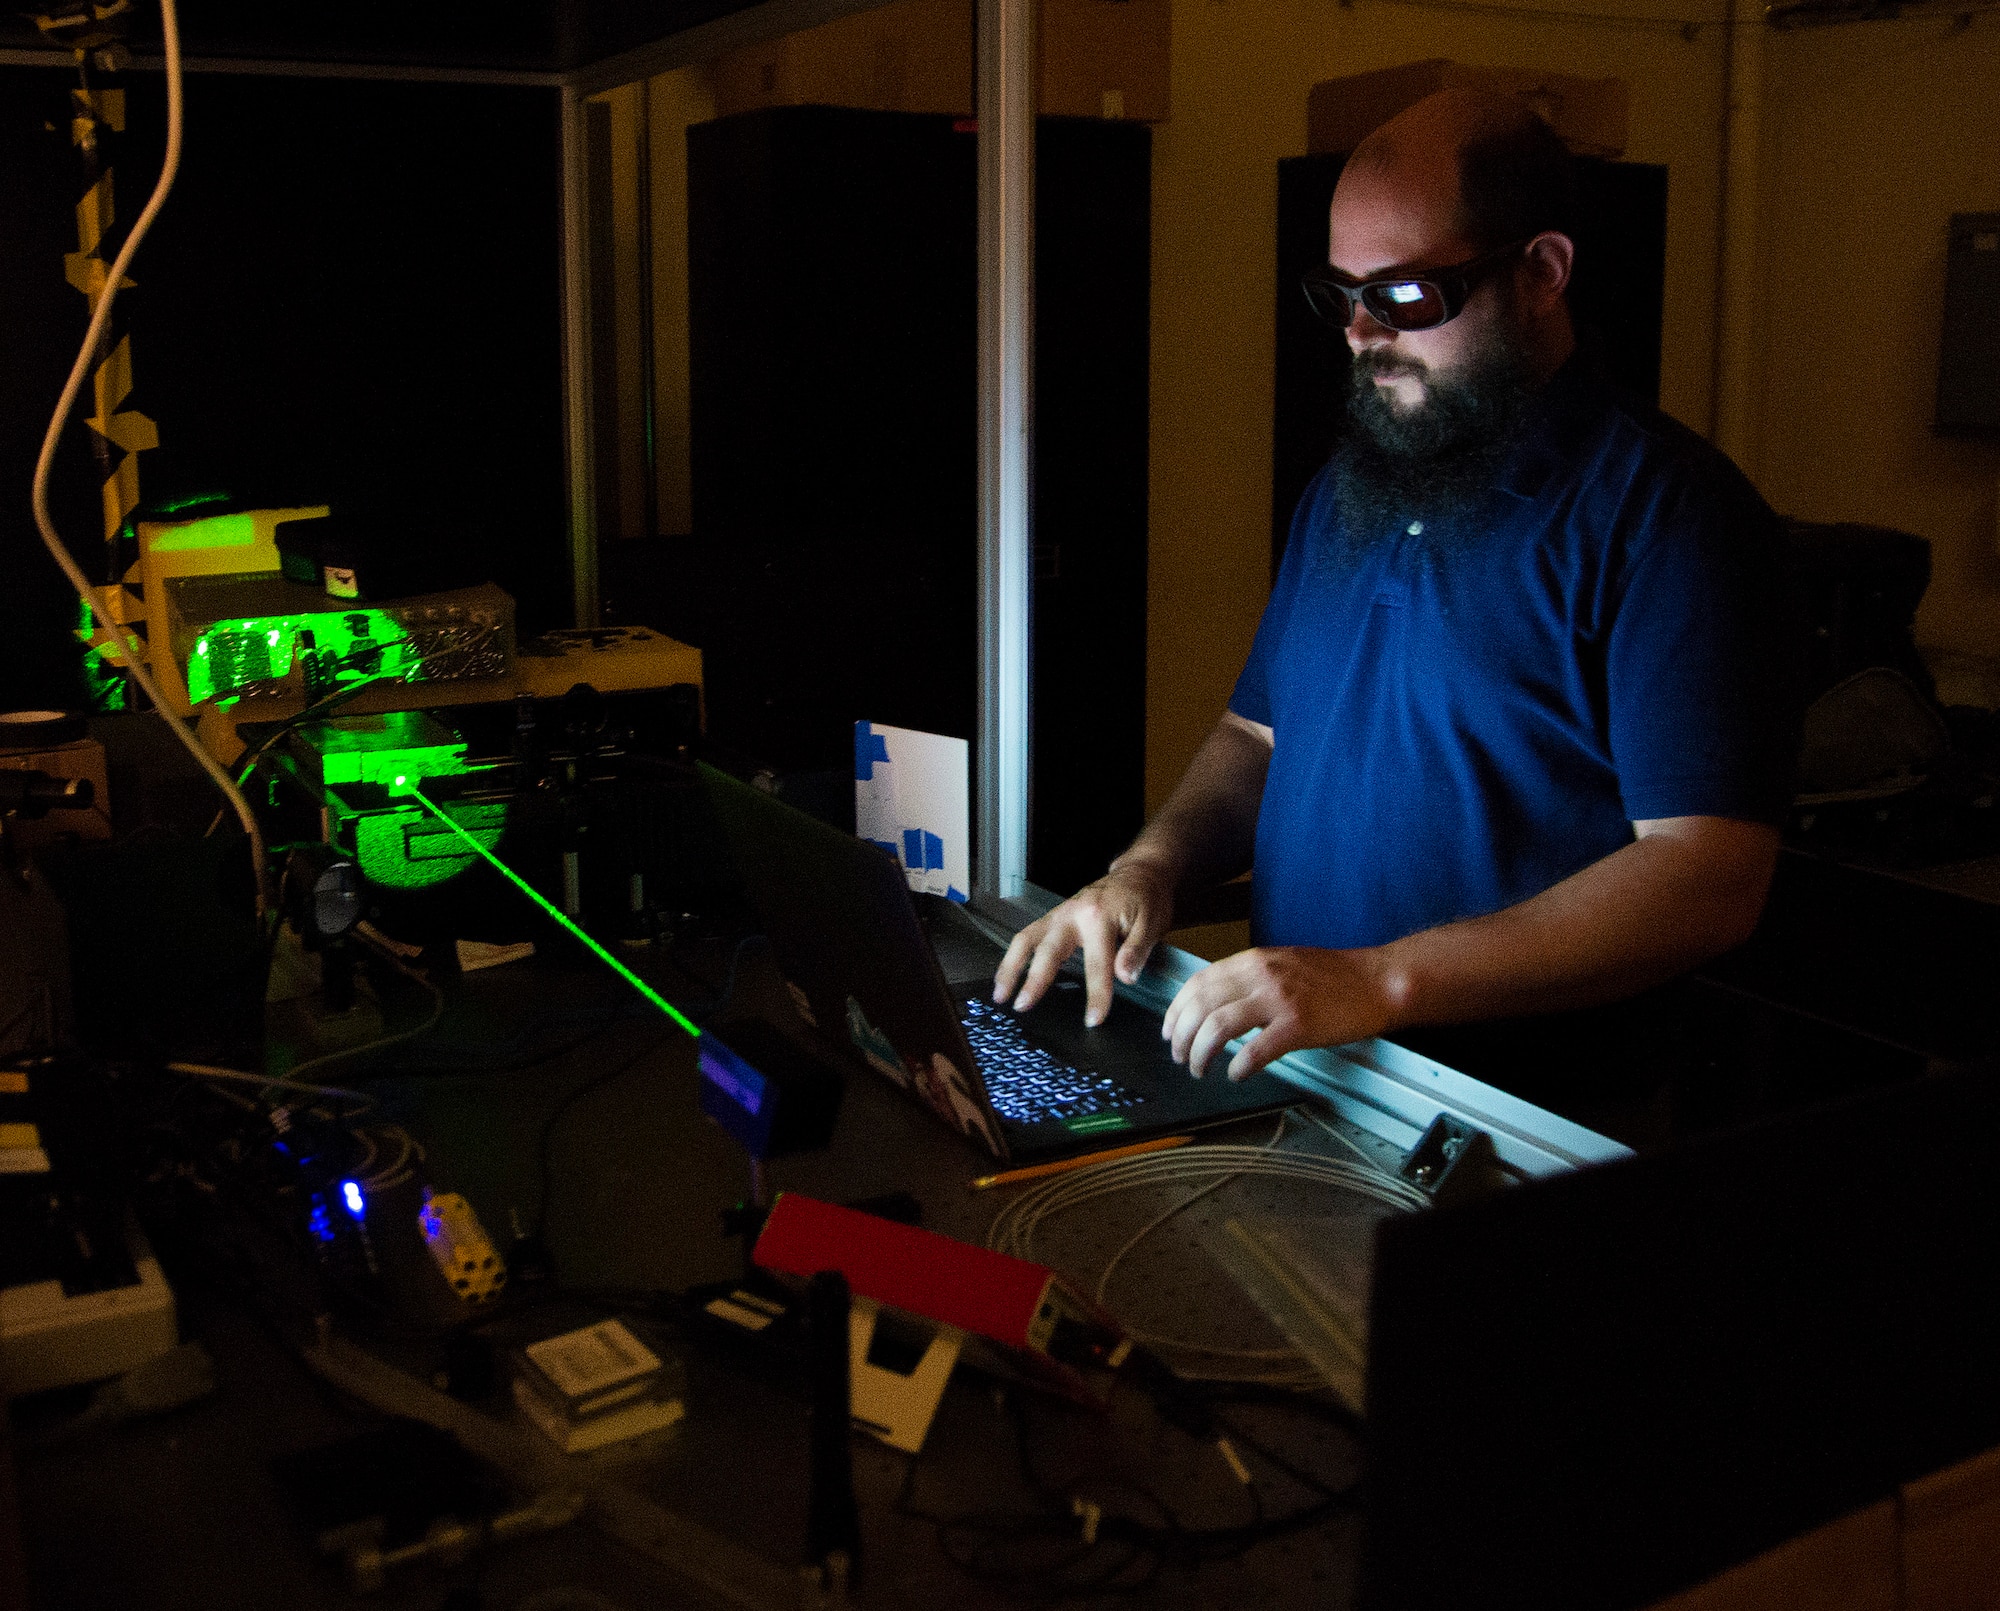 Steve Zuraski, an optical engineer with the Air Force Research Laboratory, works with the Turbulence and Aerosol Research Dynamic Interrogation System, or TARDIS laser in an Air Force Institute of Technology lab at Wright-Patterson Air Force Base, Ohio, June 21, 2017. Zuraski is an AFIT student earning an advanced degree in engineering physics. (U.S. Air Force photo/R.J. Oriez)